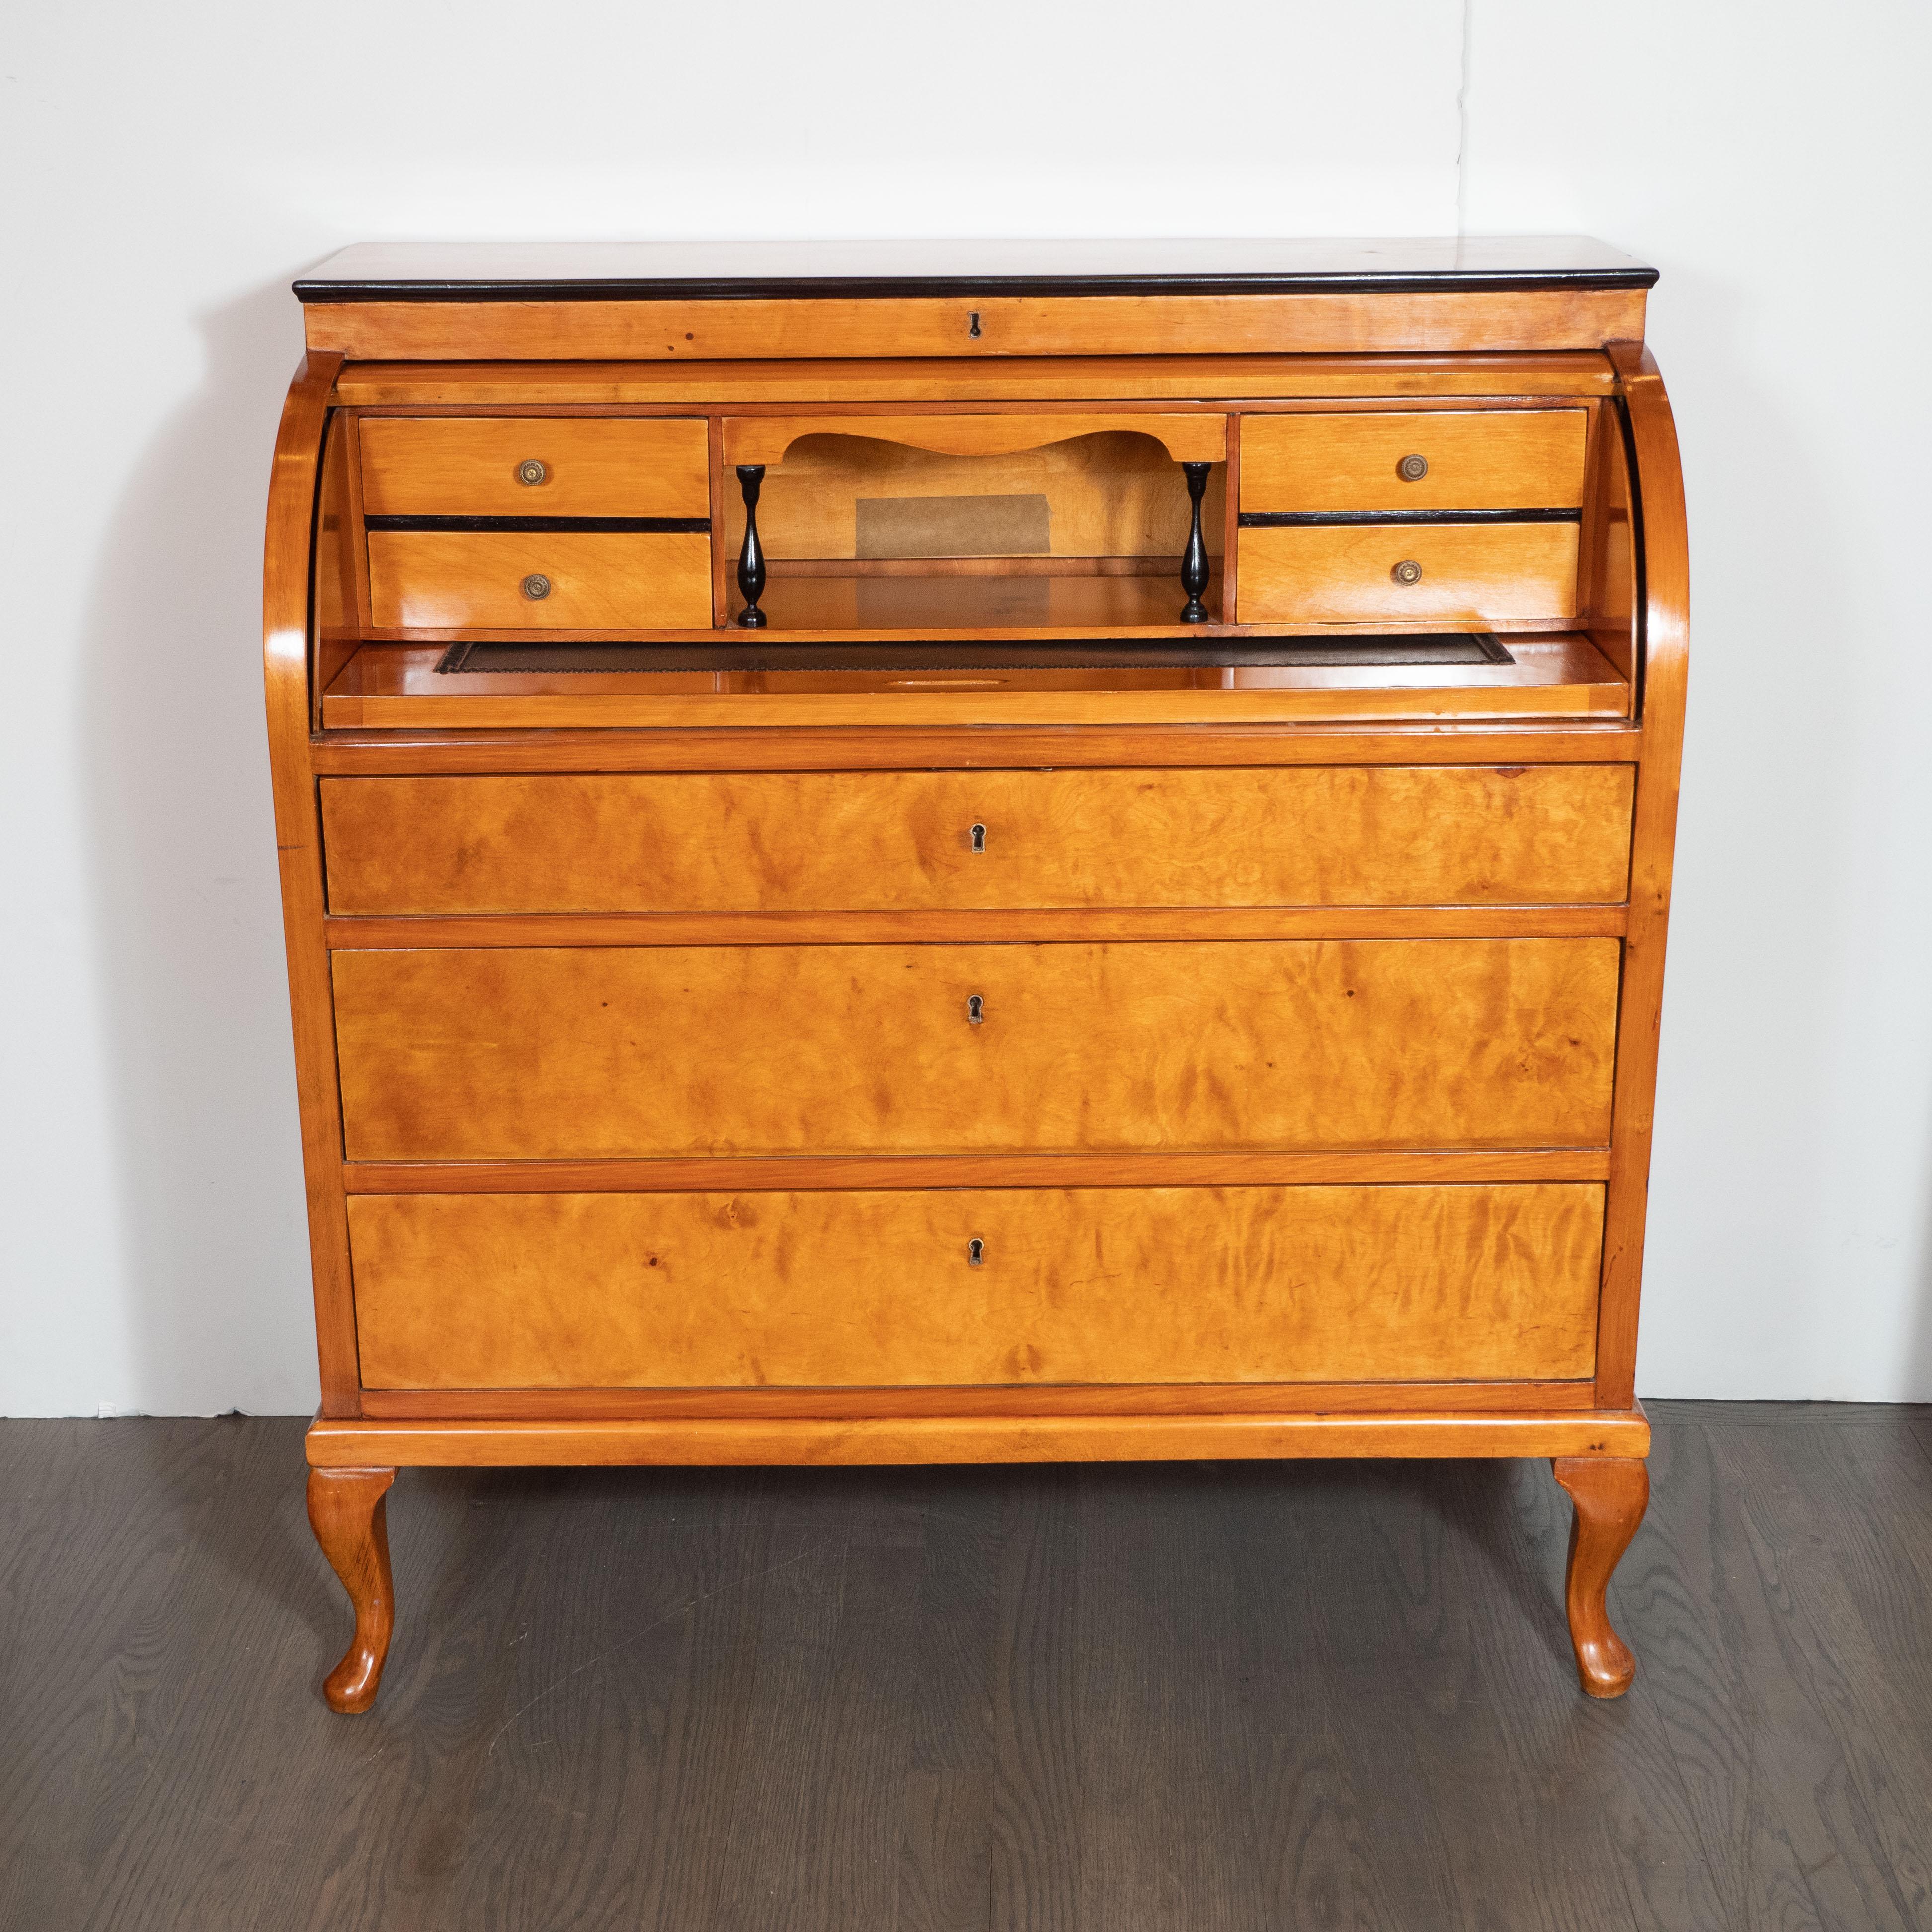 This elegant Biedermeier roll top desk was realized in Vienna Austria, circa 1860. Sitting on cabriolet feet, the piece features a volumetric rectangular body with a slightly protruding apron and gently curved roll top front, and three drawers with